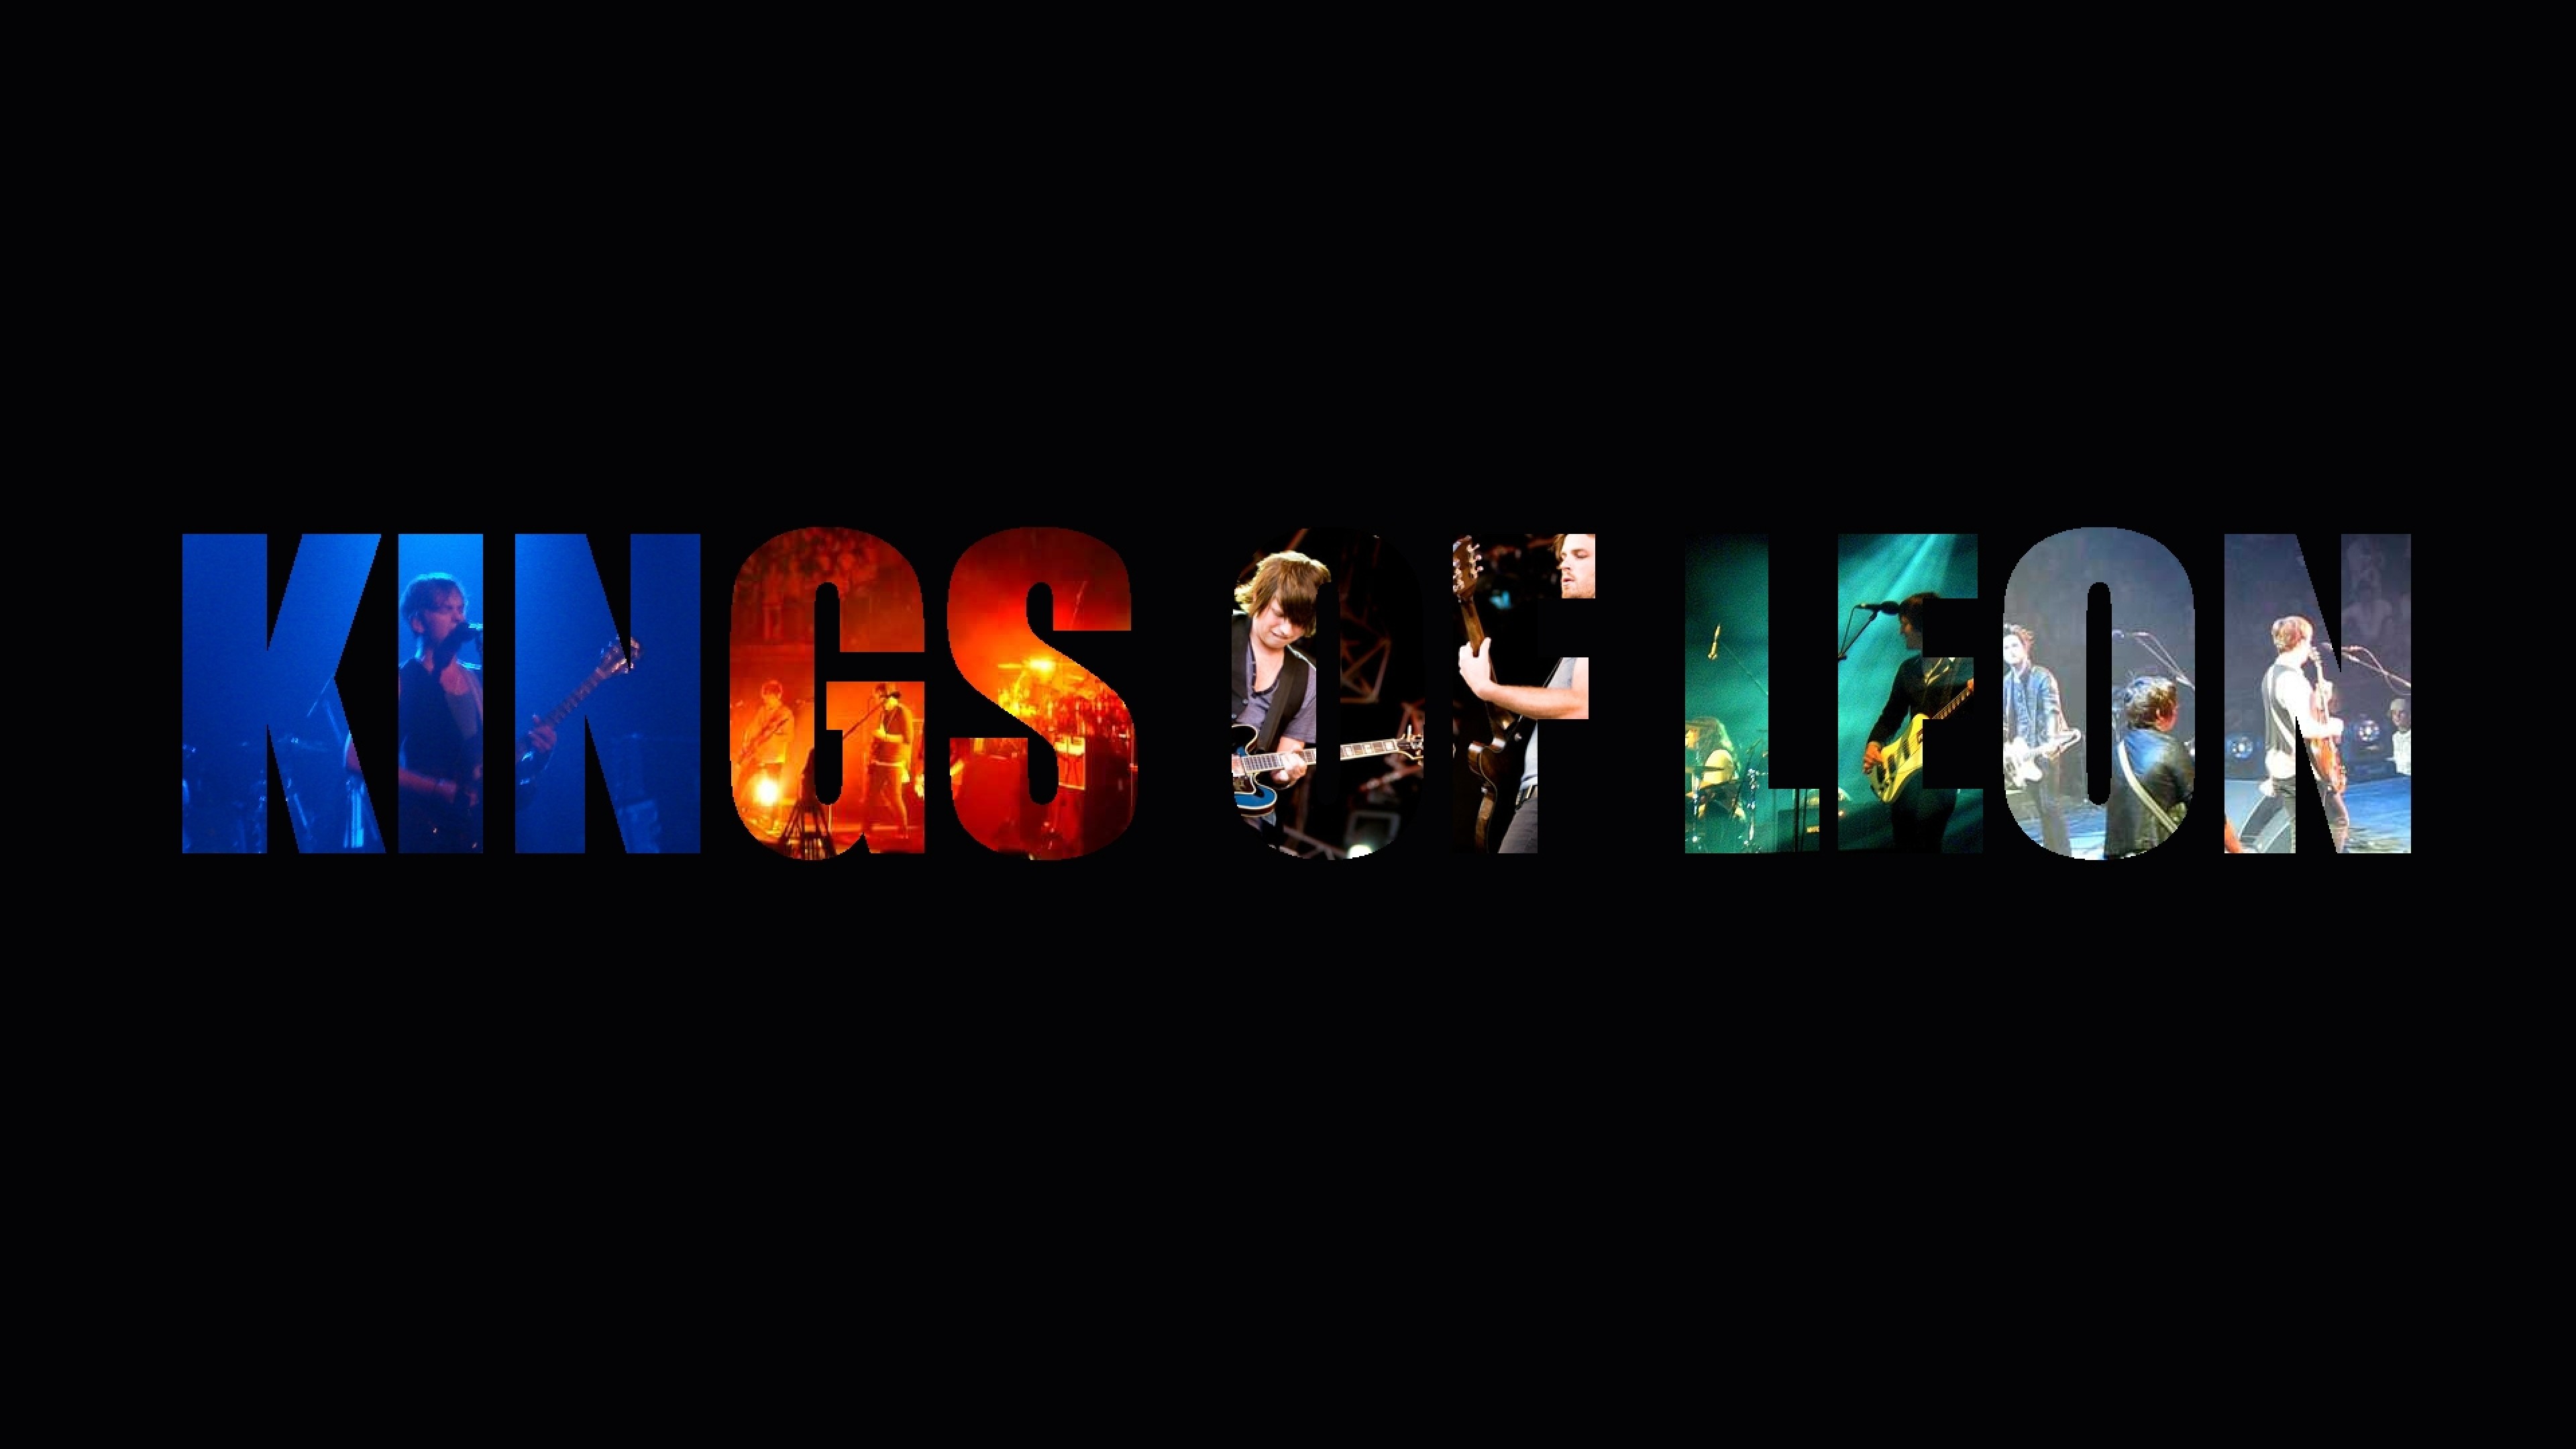 3840x2160  Wallpaper kings of leon, letters, action, concert, members